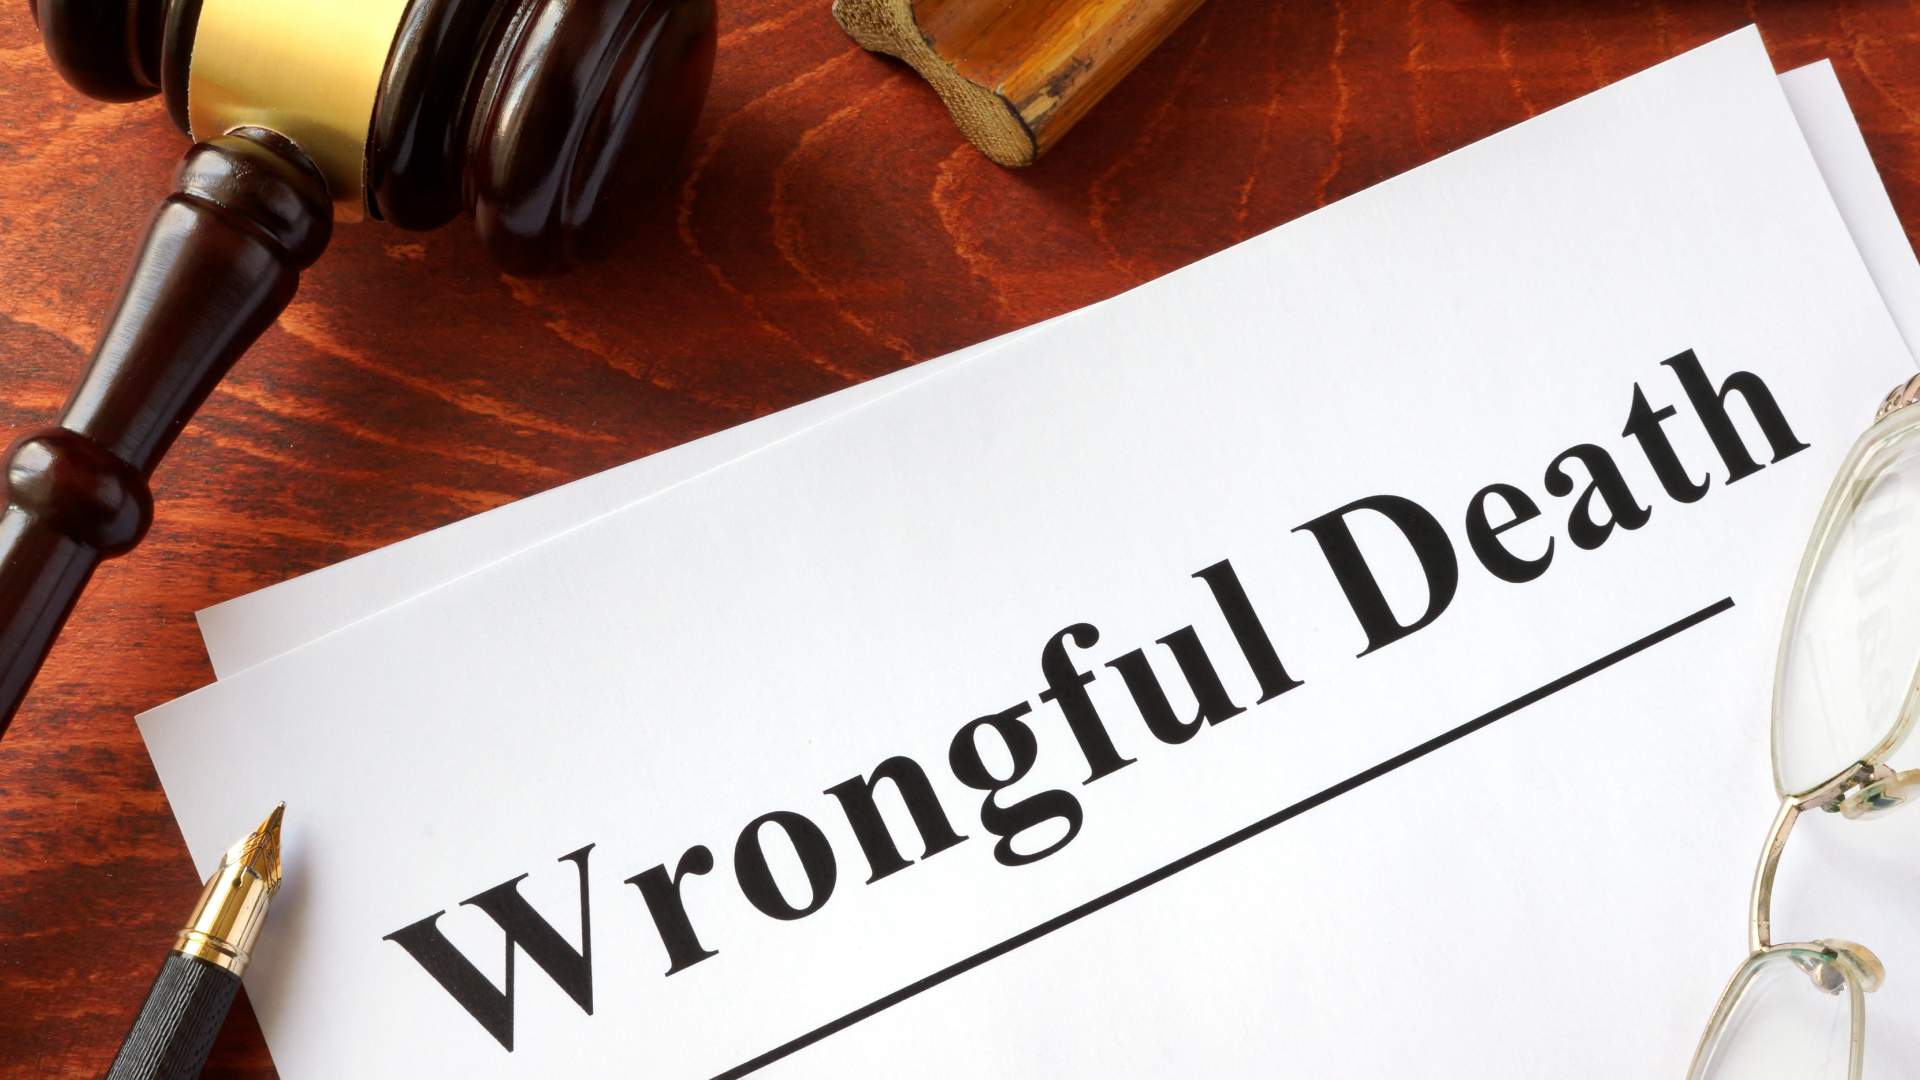 Wrongful death paperwork with a gavel on top